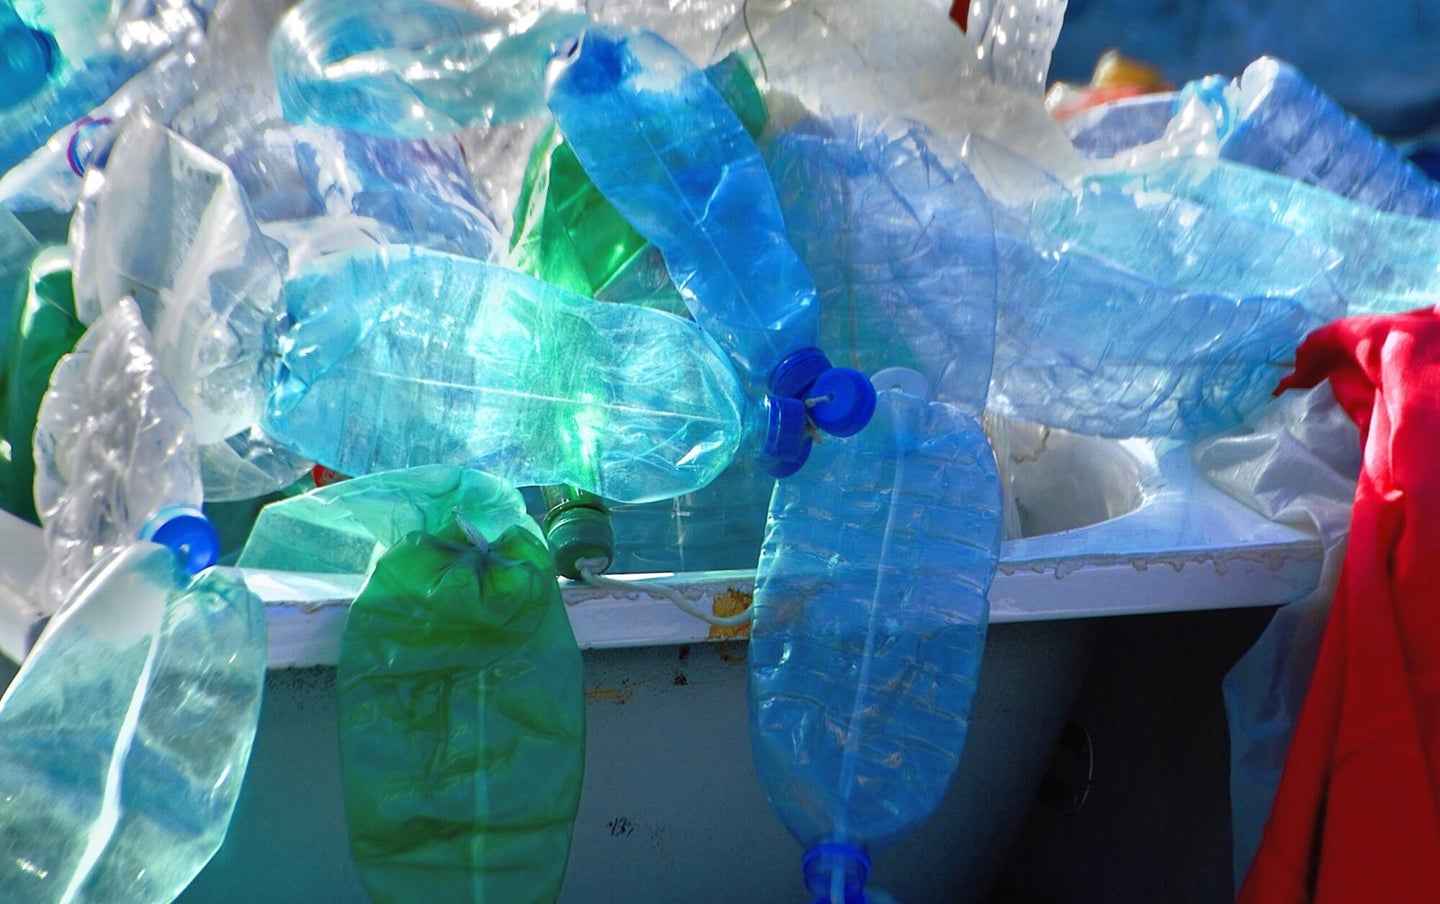 A trash bin is overflowing with blue and green plastic bottles